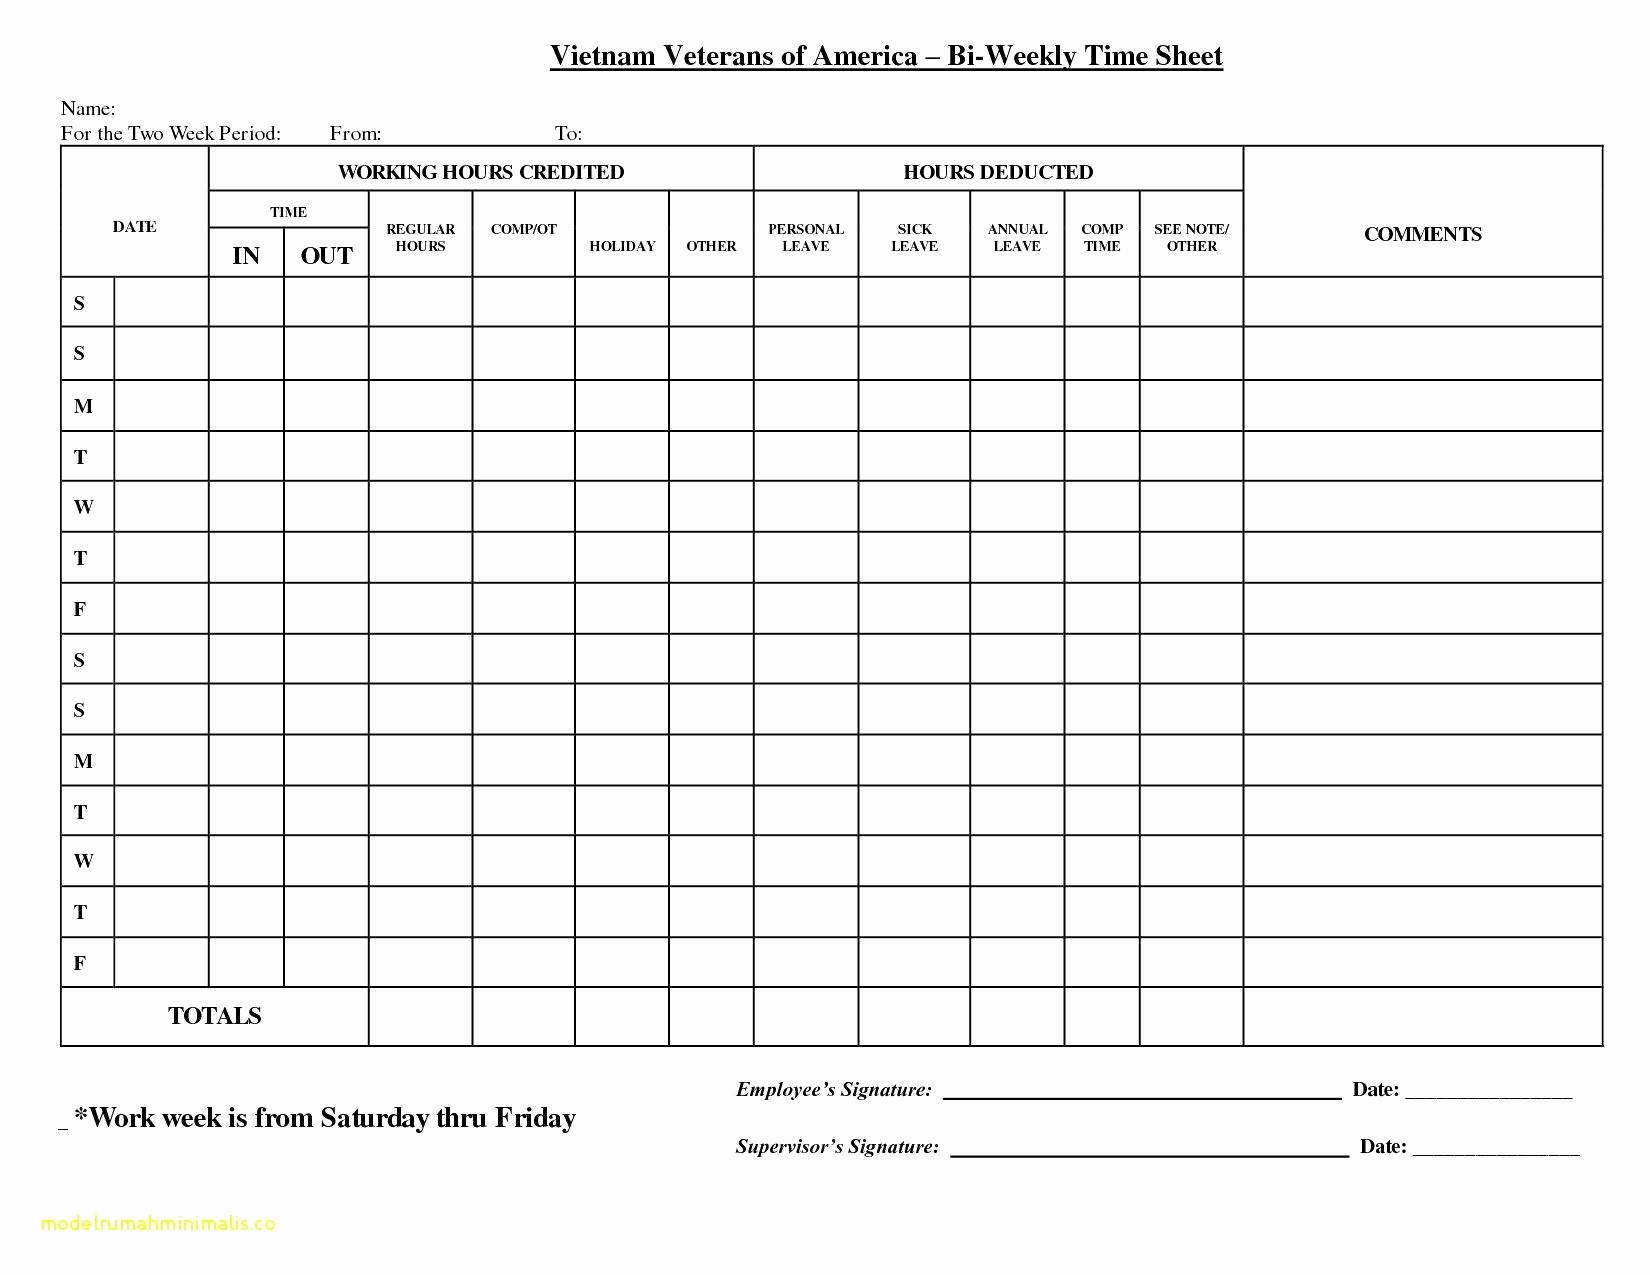 Excel Time Card Template Free New Employee Time Sheet form Awesome Spreadsheet Fill Card